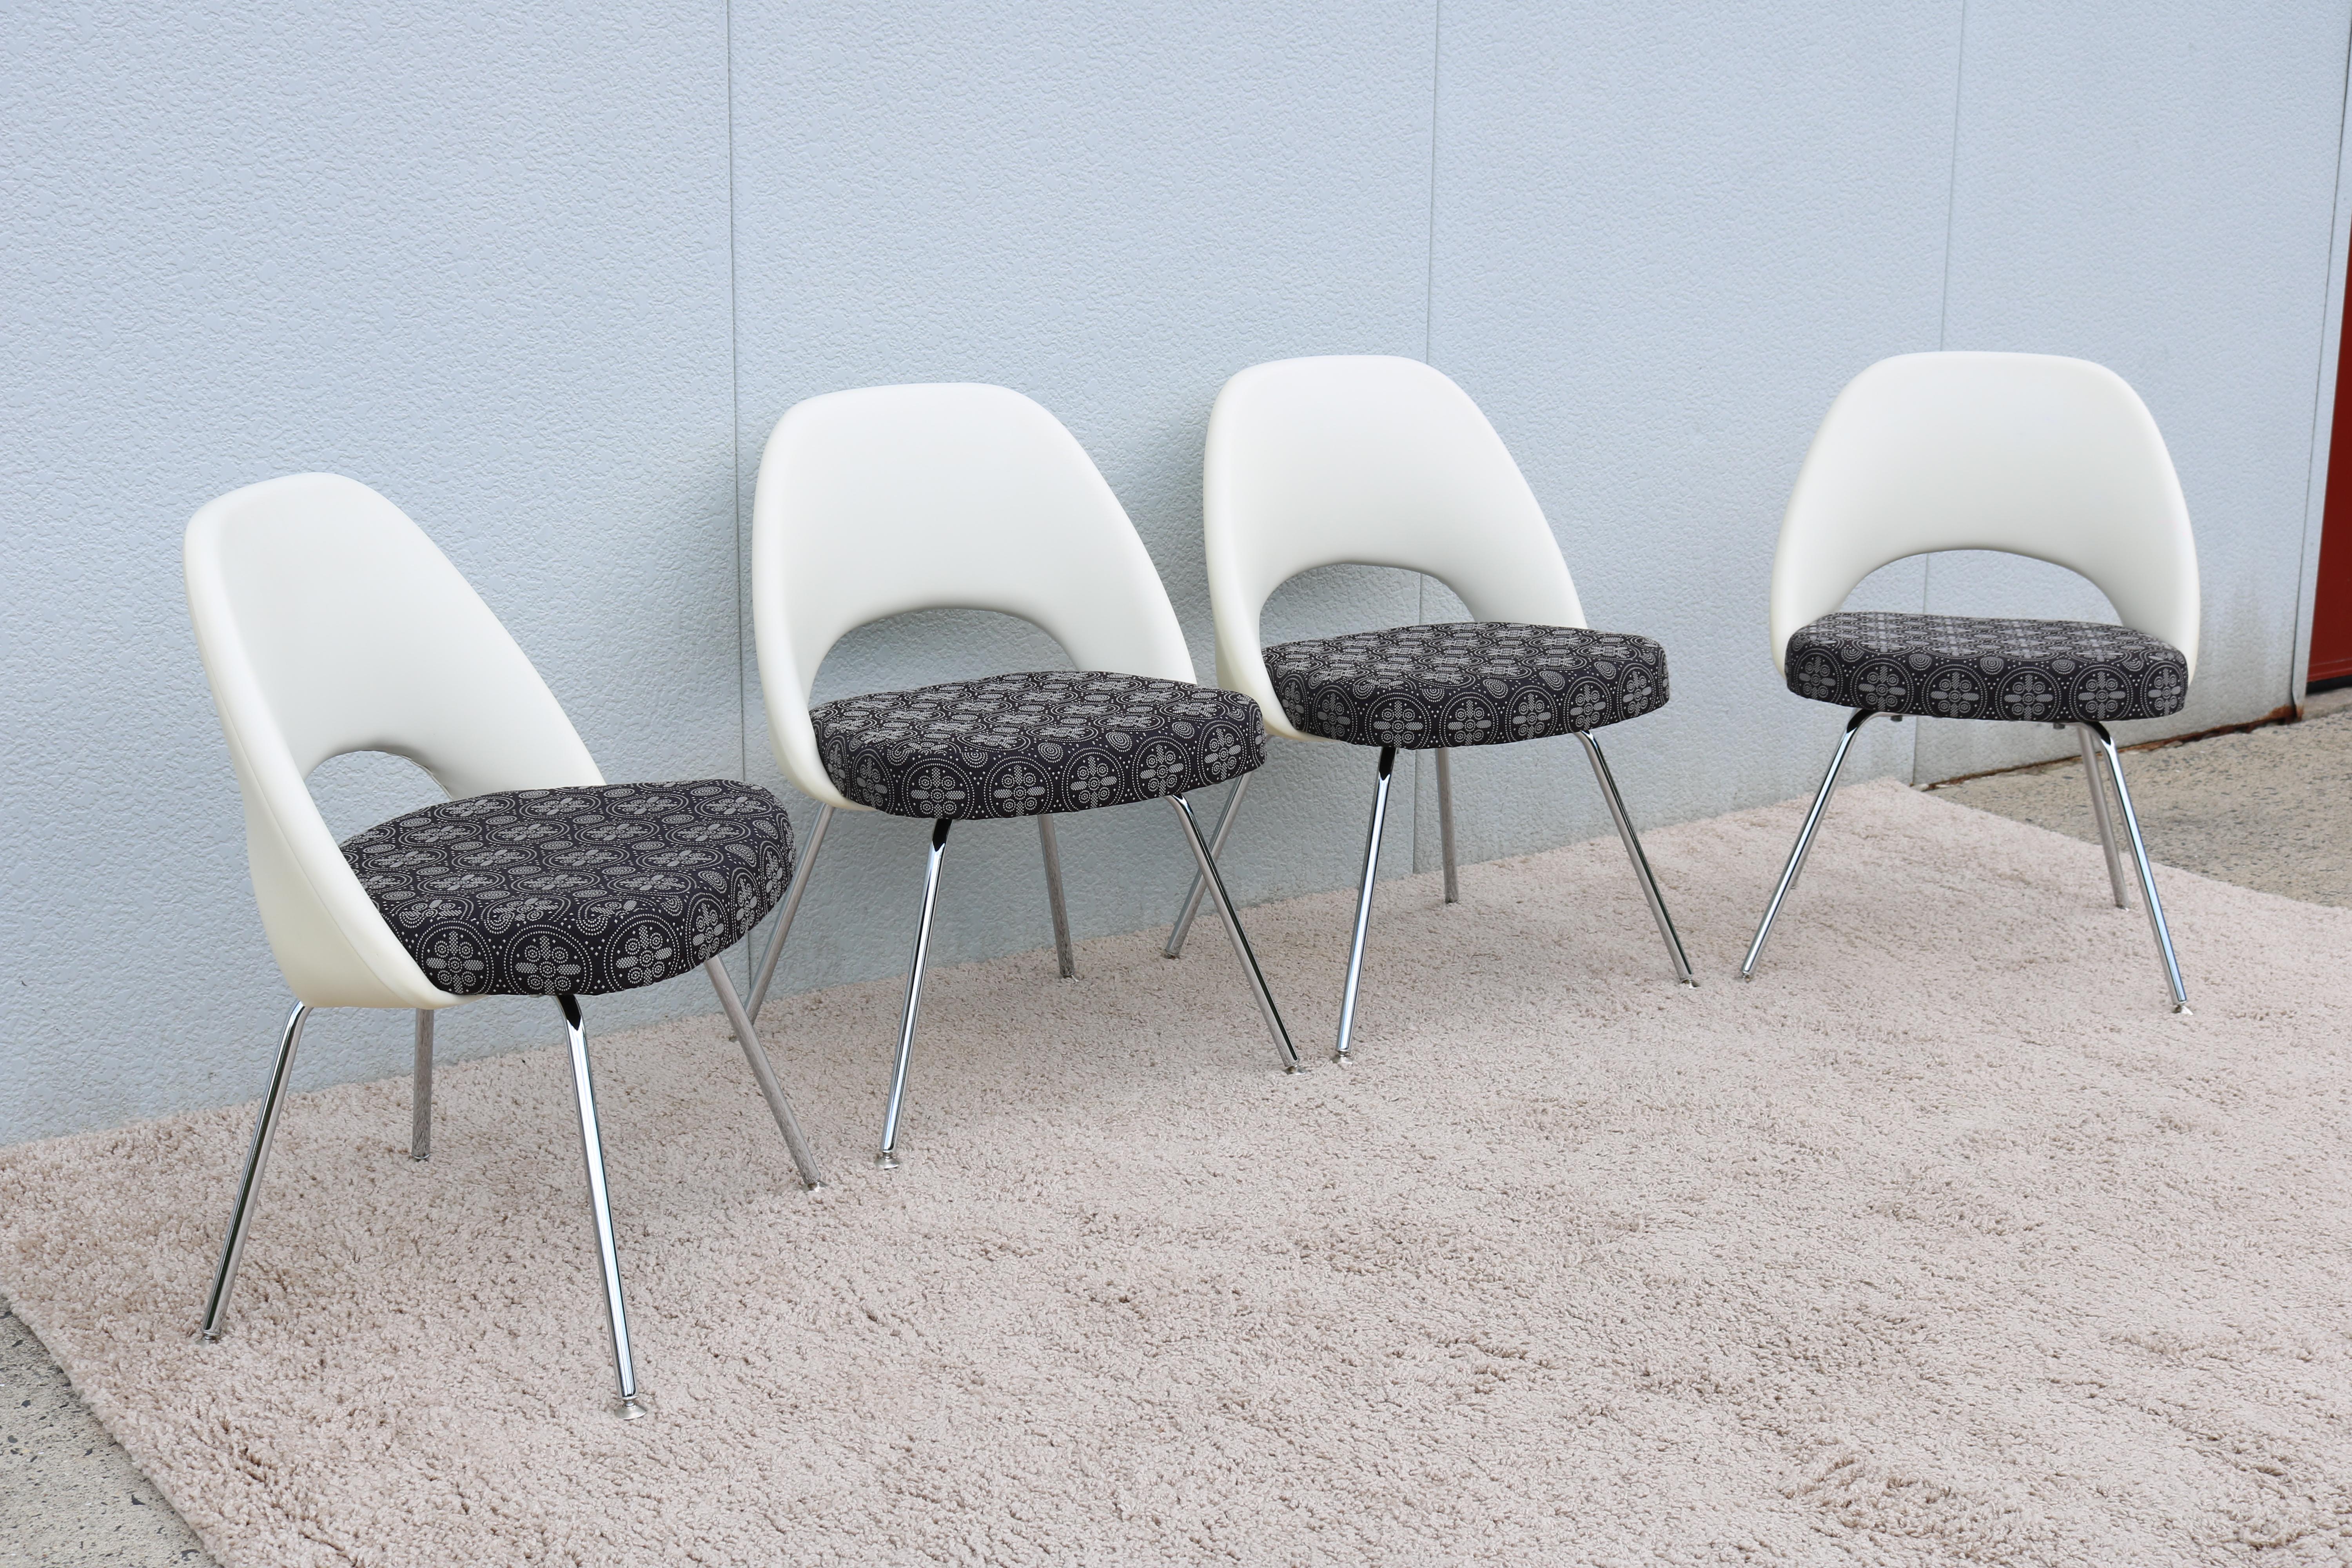 Polished Mid-Century Modern Eero Saarinen for Knoll Executive Armless Chairs, Set of 4 For Sale